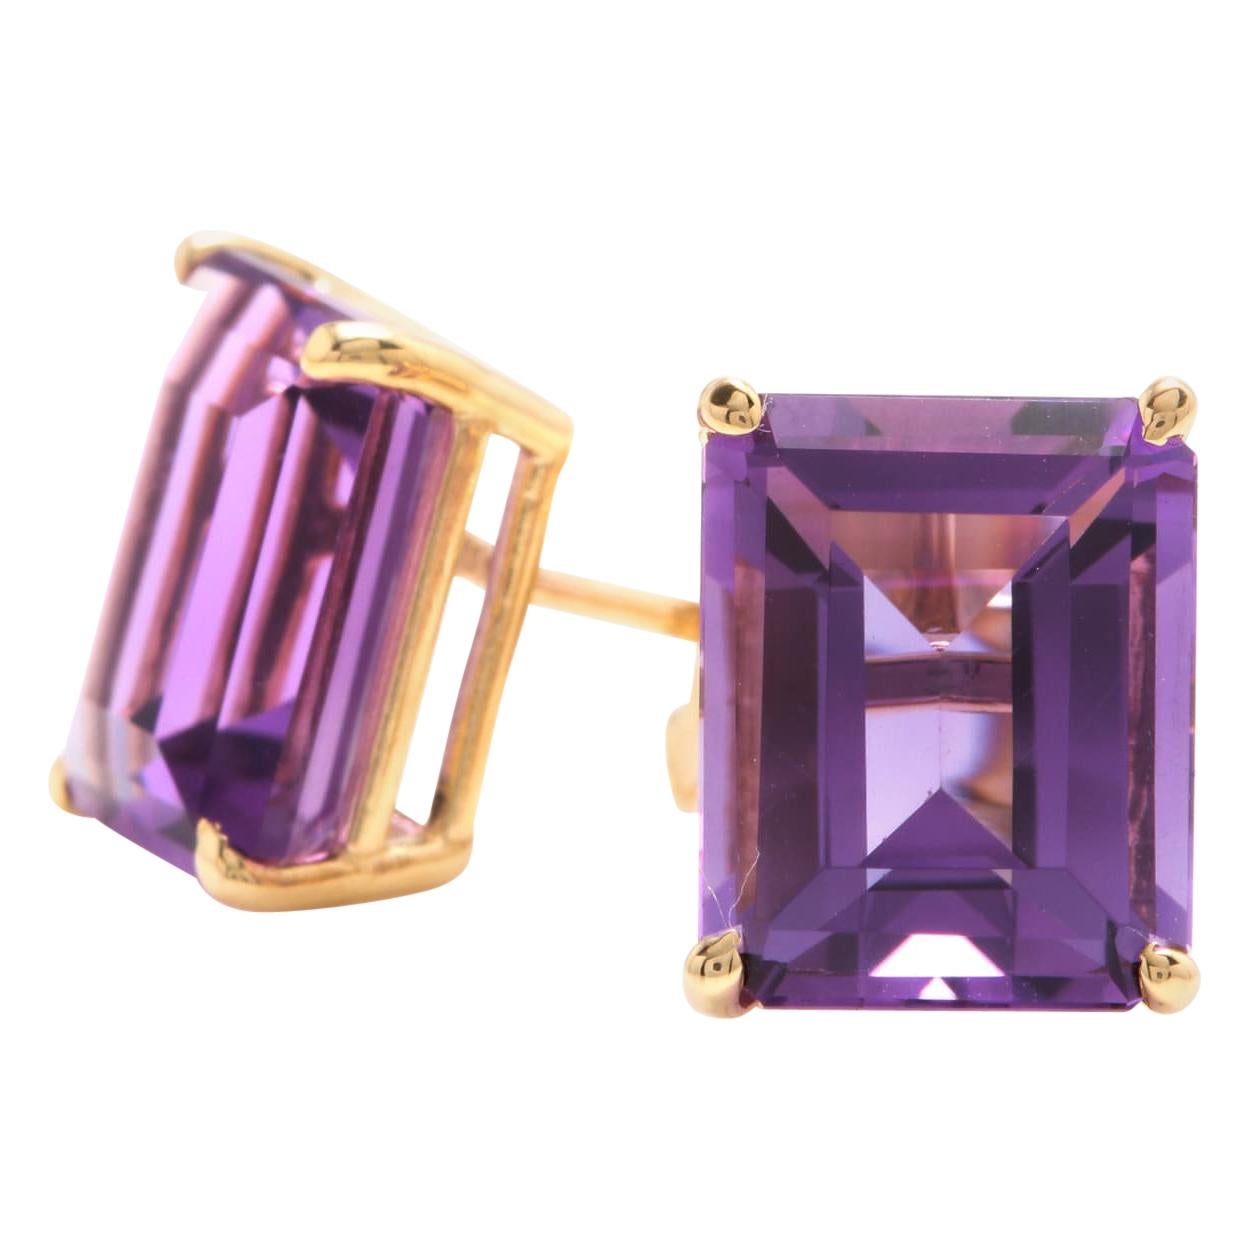 Exquisite Top Quality 7.45 Carat Natural Amethyst 14K Solid Yellow Gold Stud